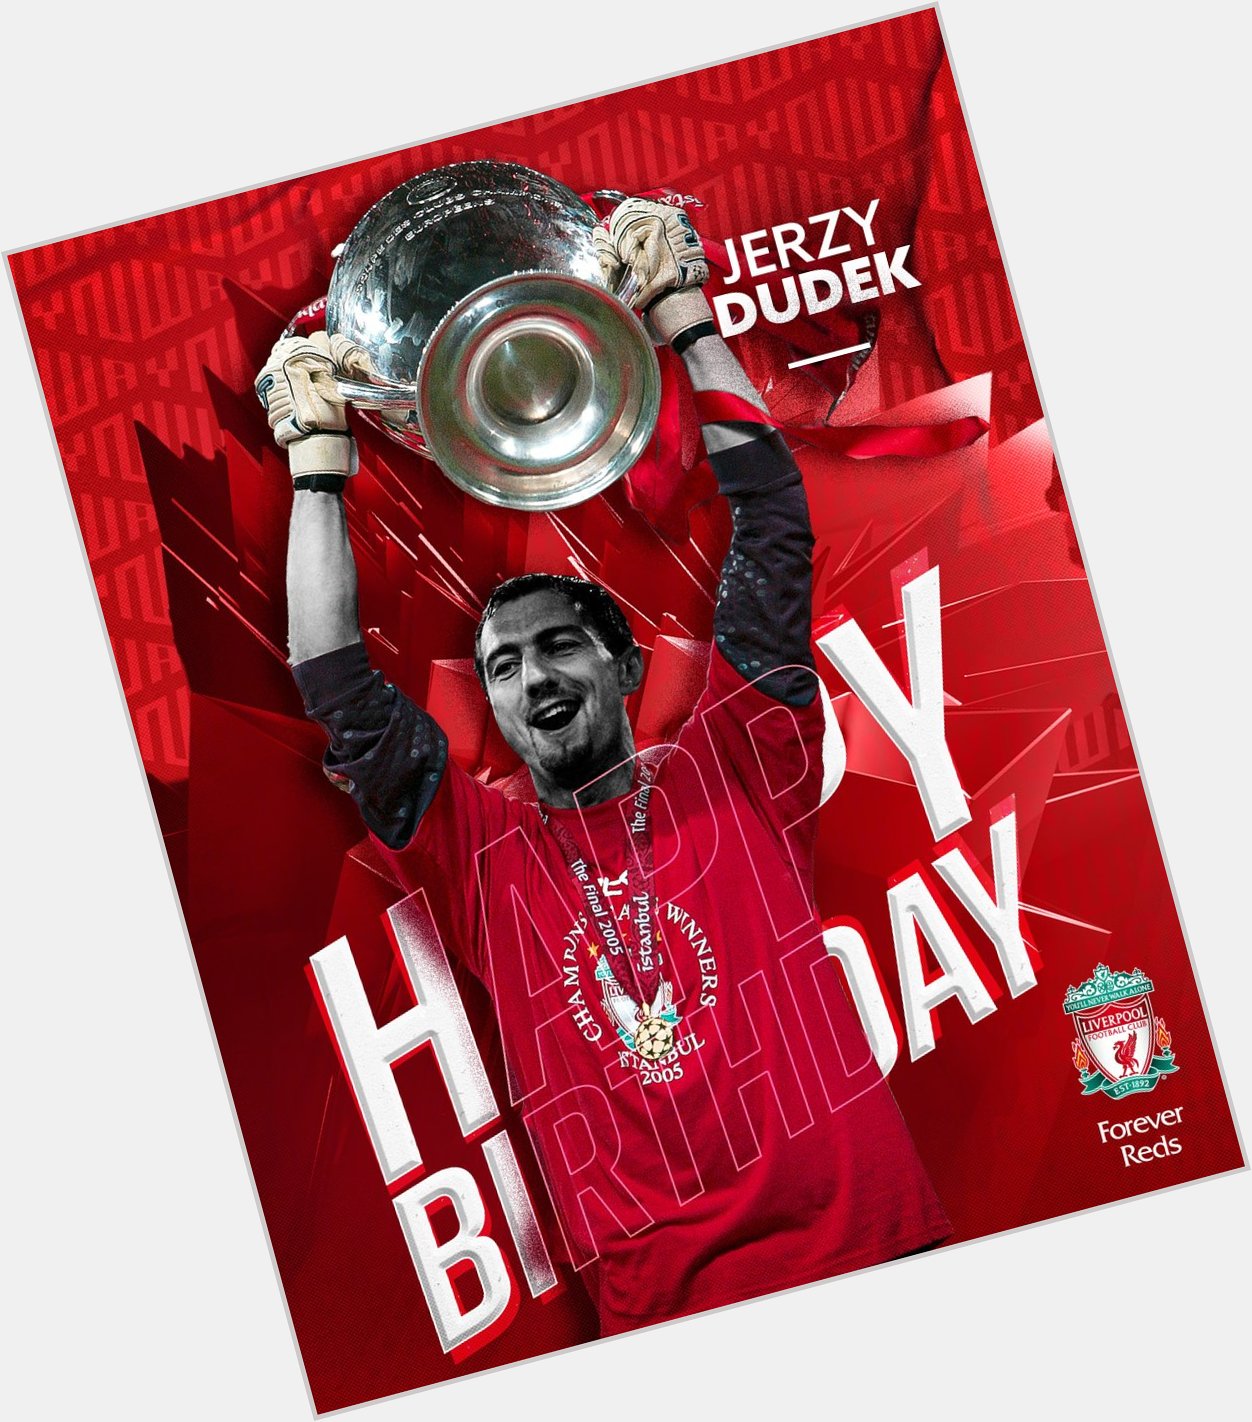 A special day for one of our heroes of Istanbul Happy Birthday, Jerzy Dudek! 